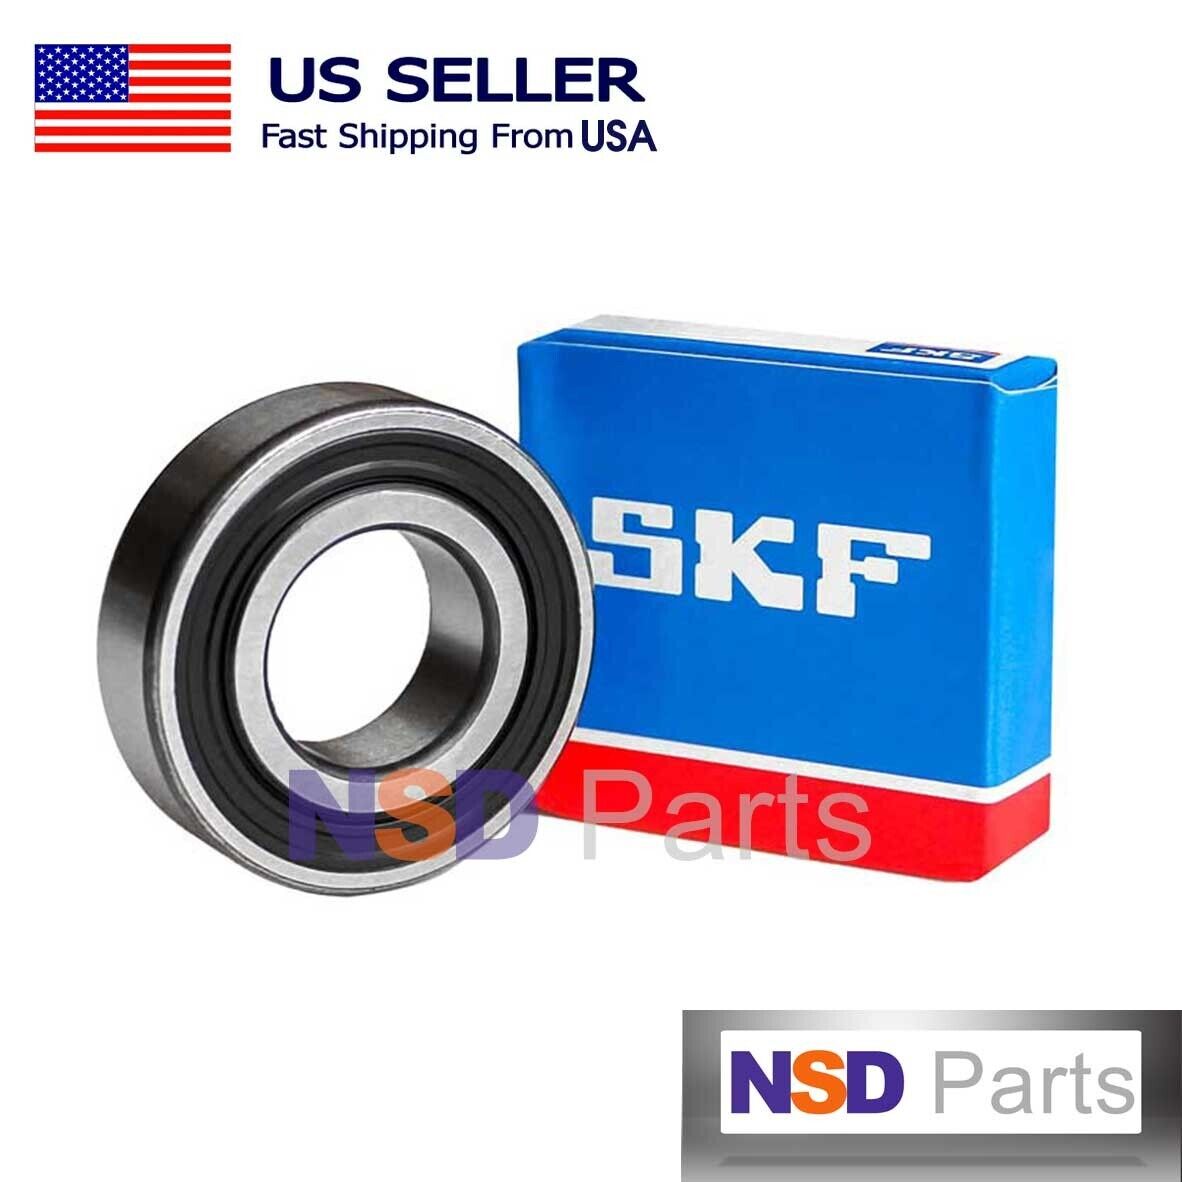 6301-2RS SKF Brand rubber seals bearing 6301-rs ball bearings 6301 rs